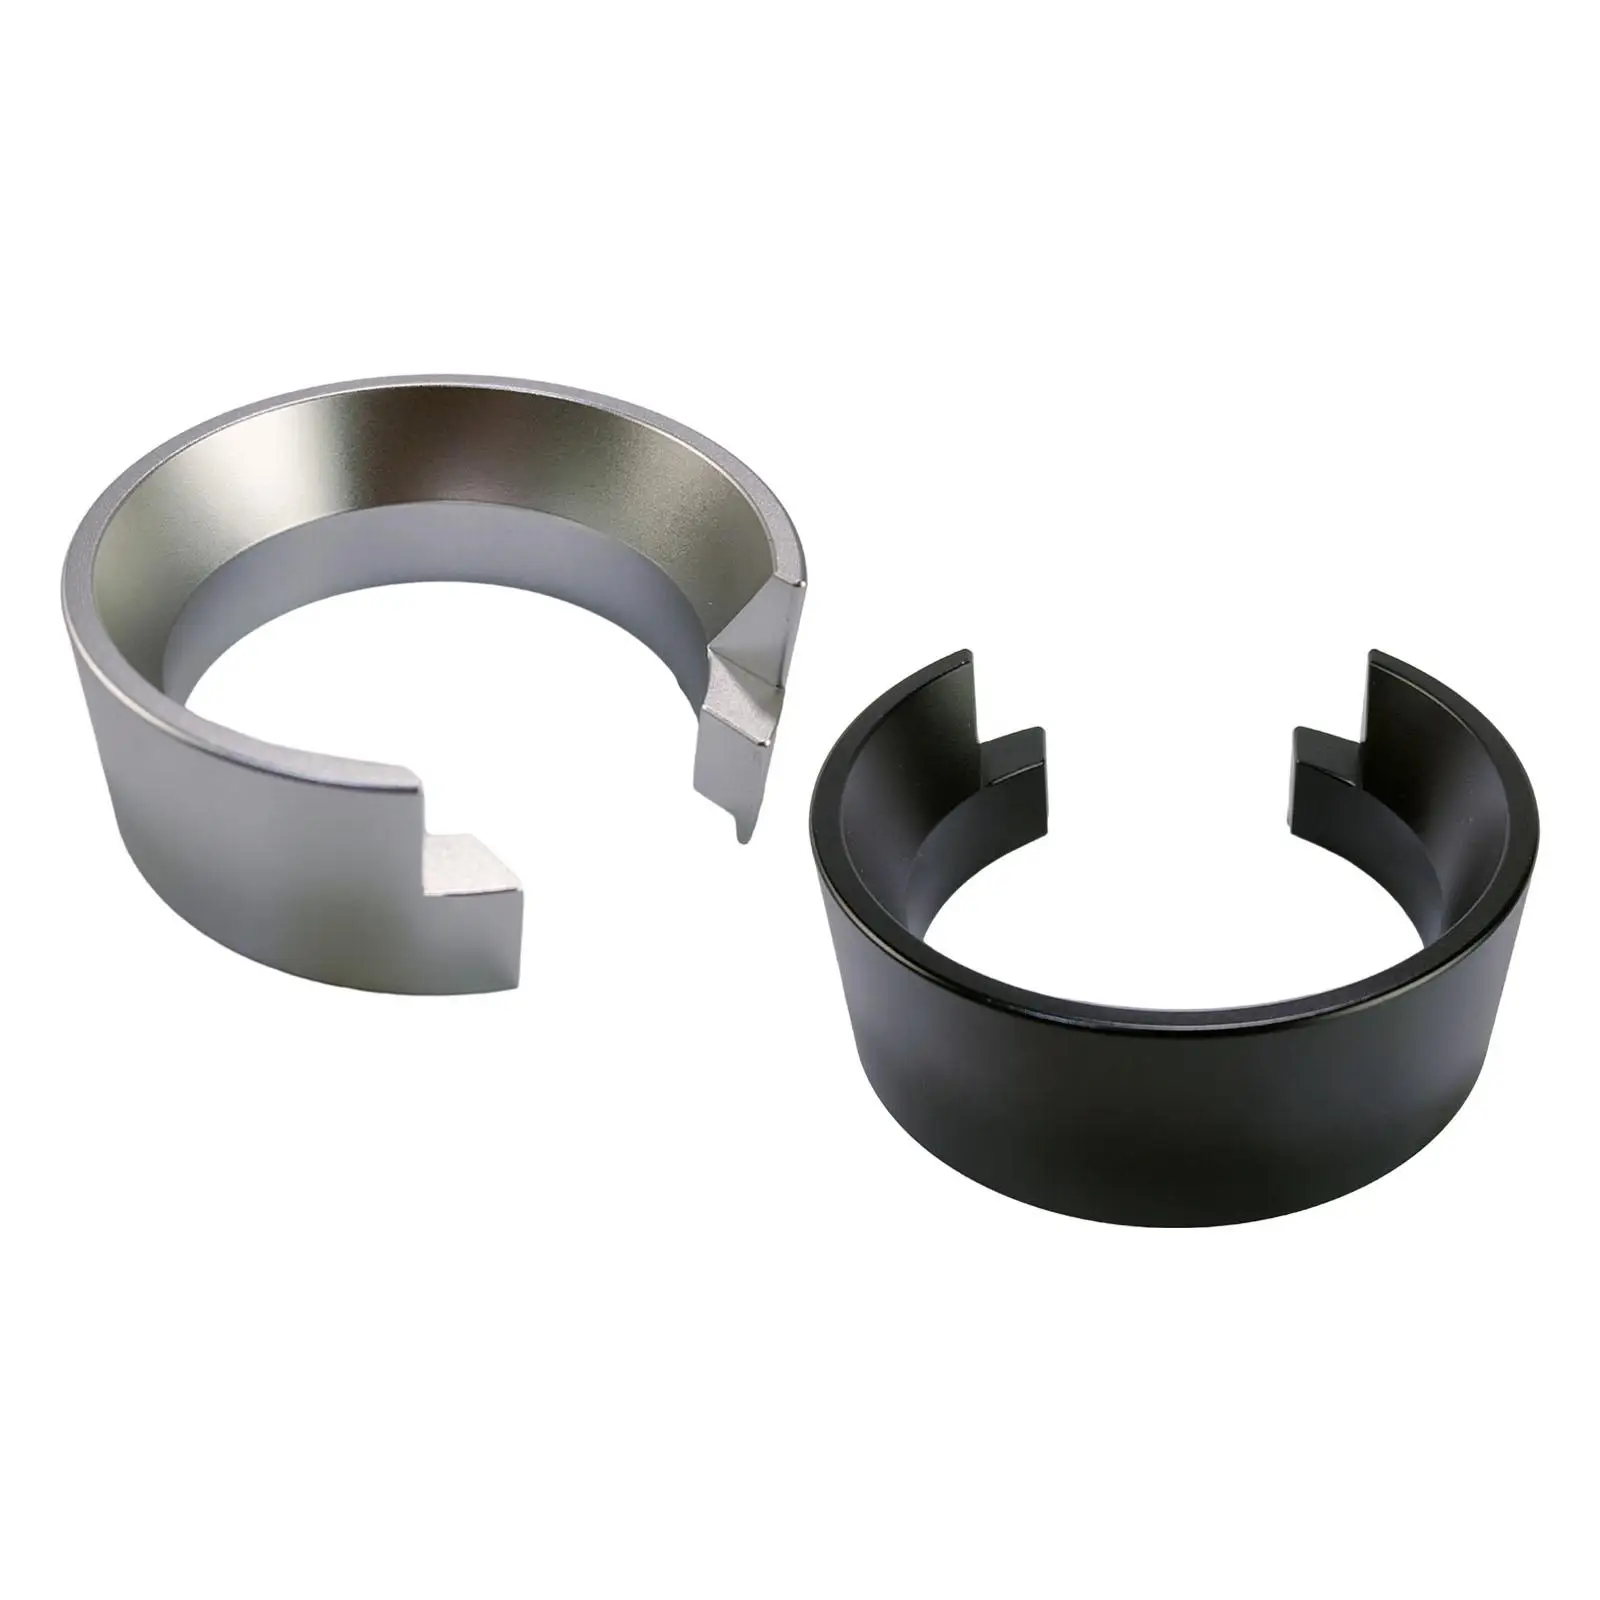 58mm Espresso Coffee Dosing Rings Professional Cafe Tools for Cafe Shop Bar